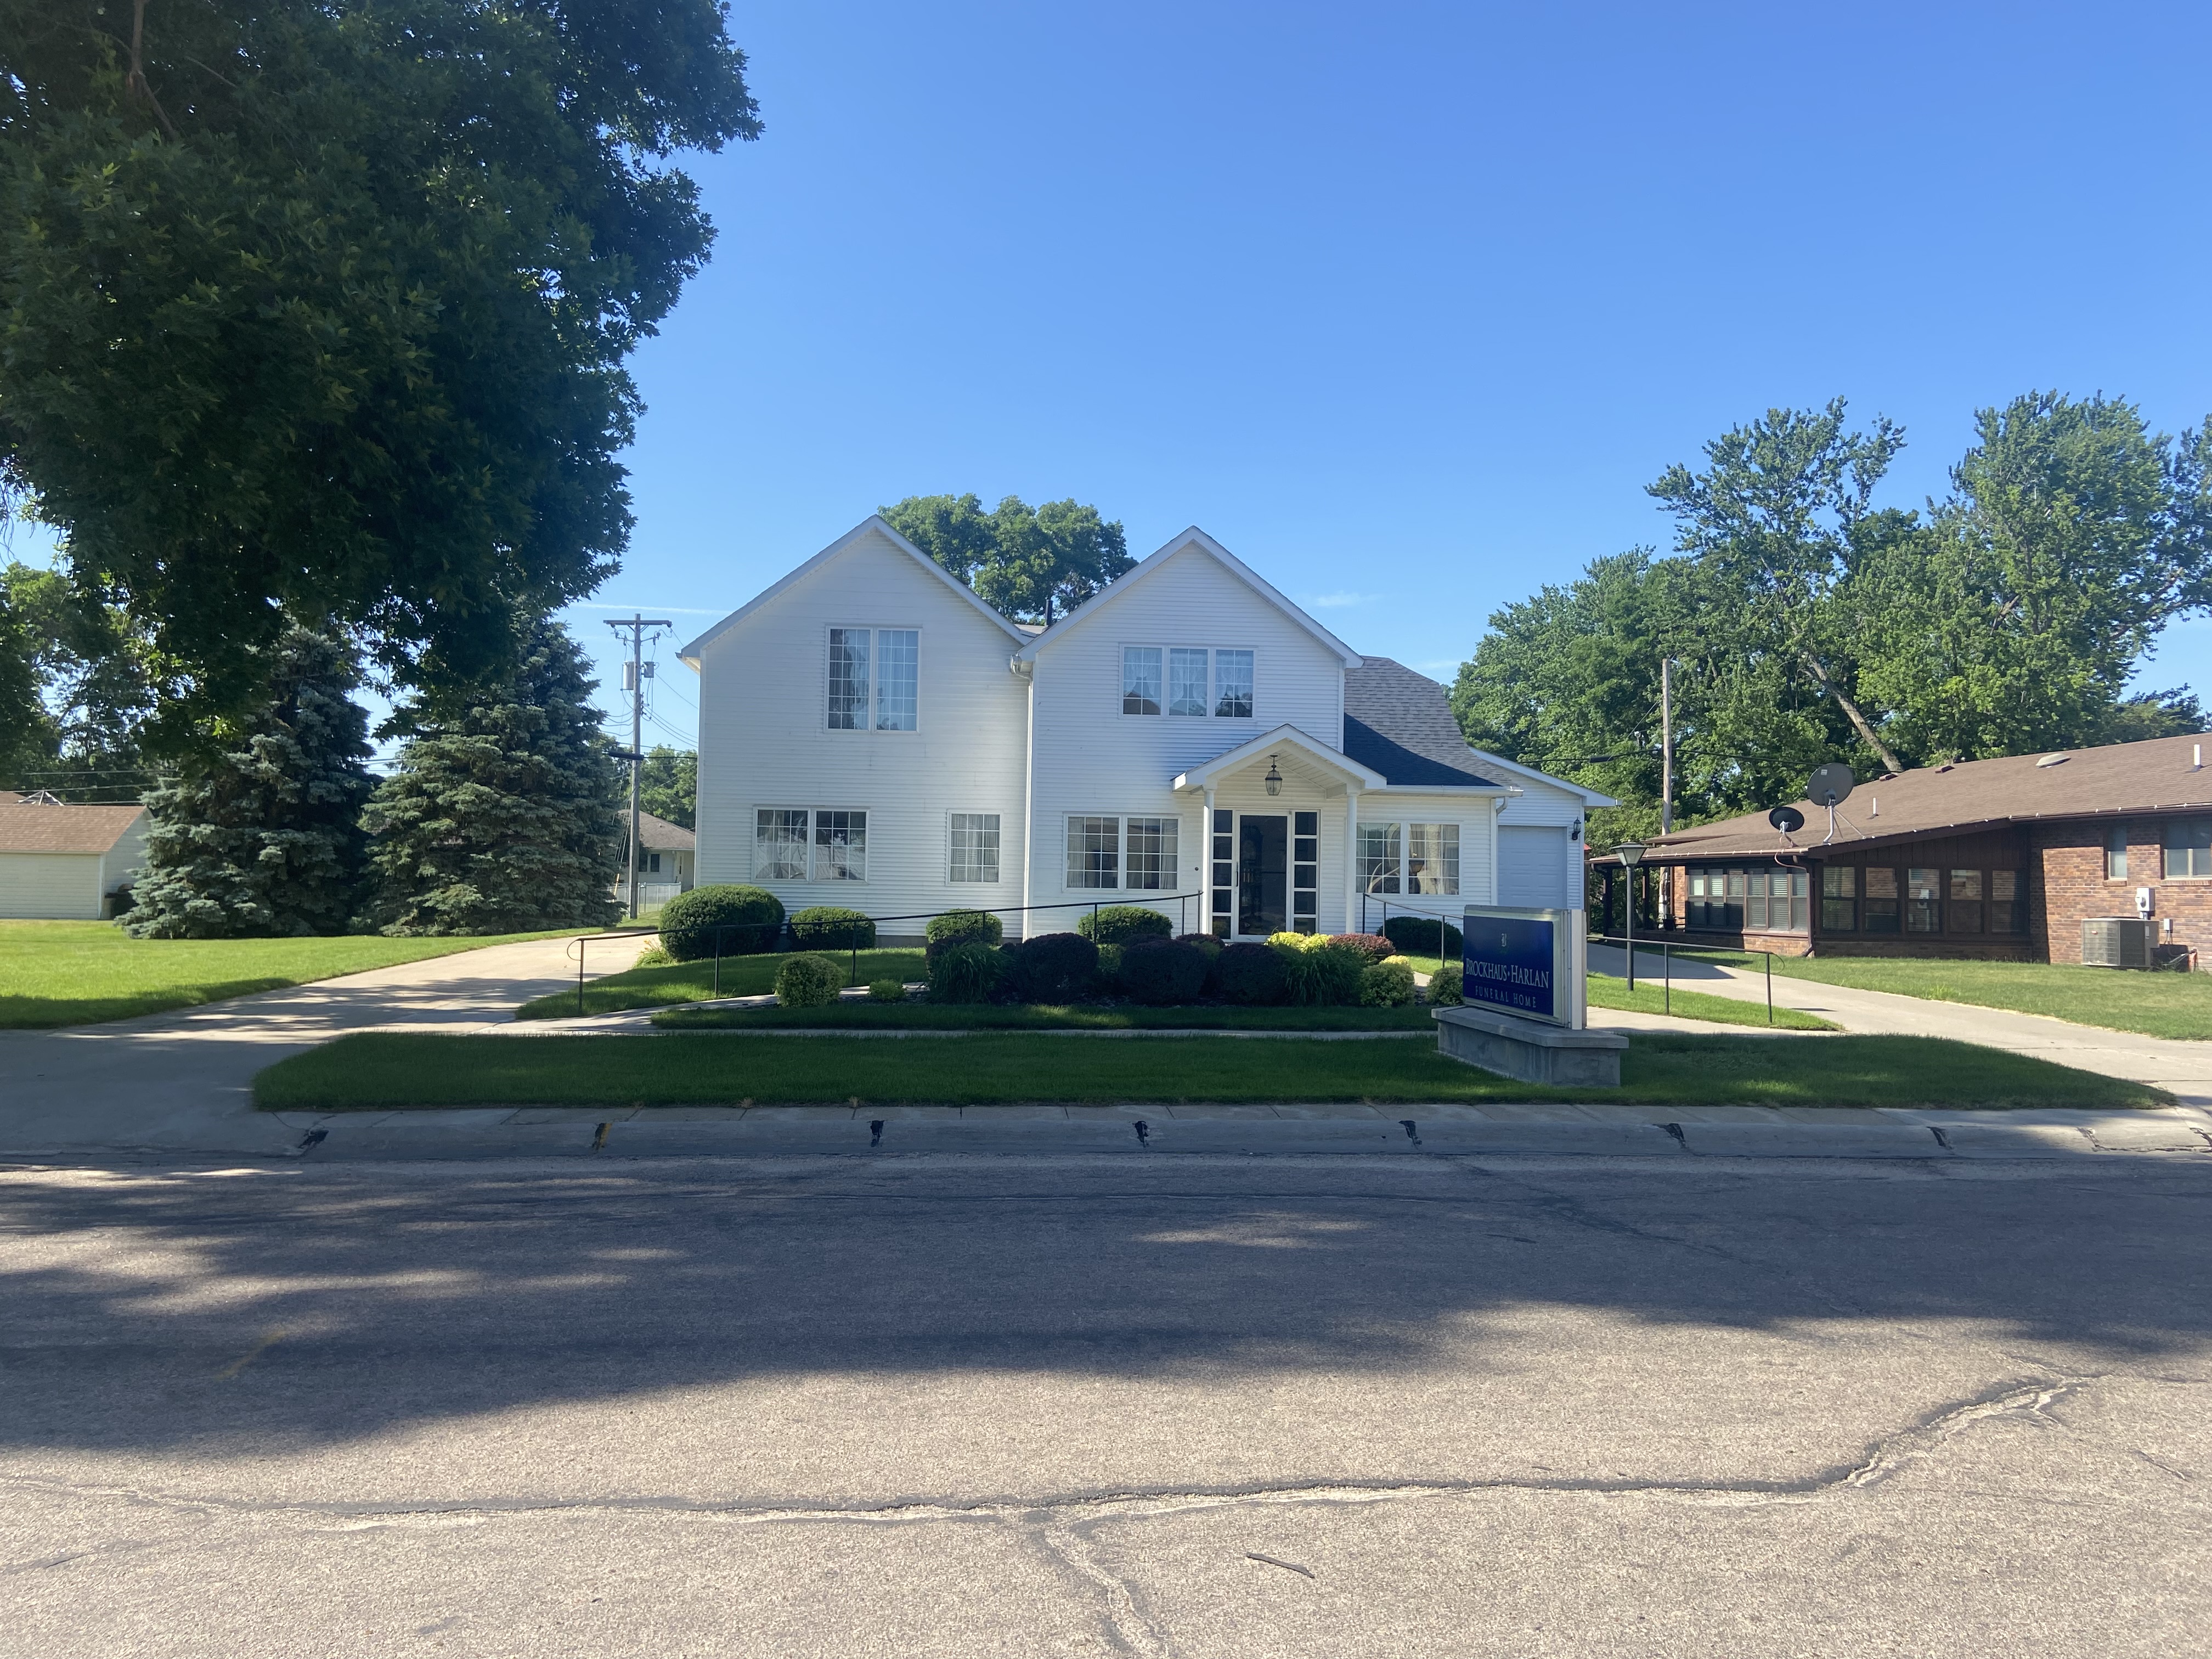 Brockhaus-Harlan Funeral Home Front View